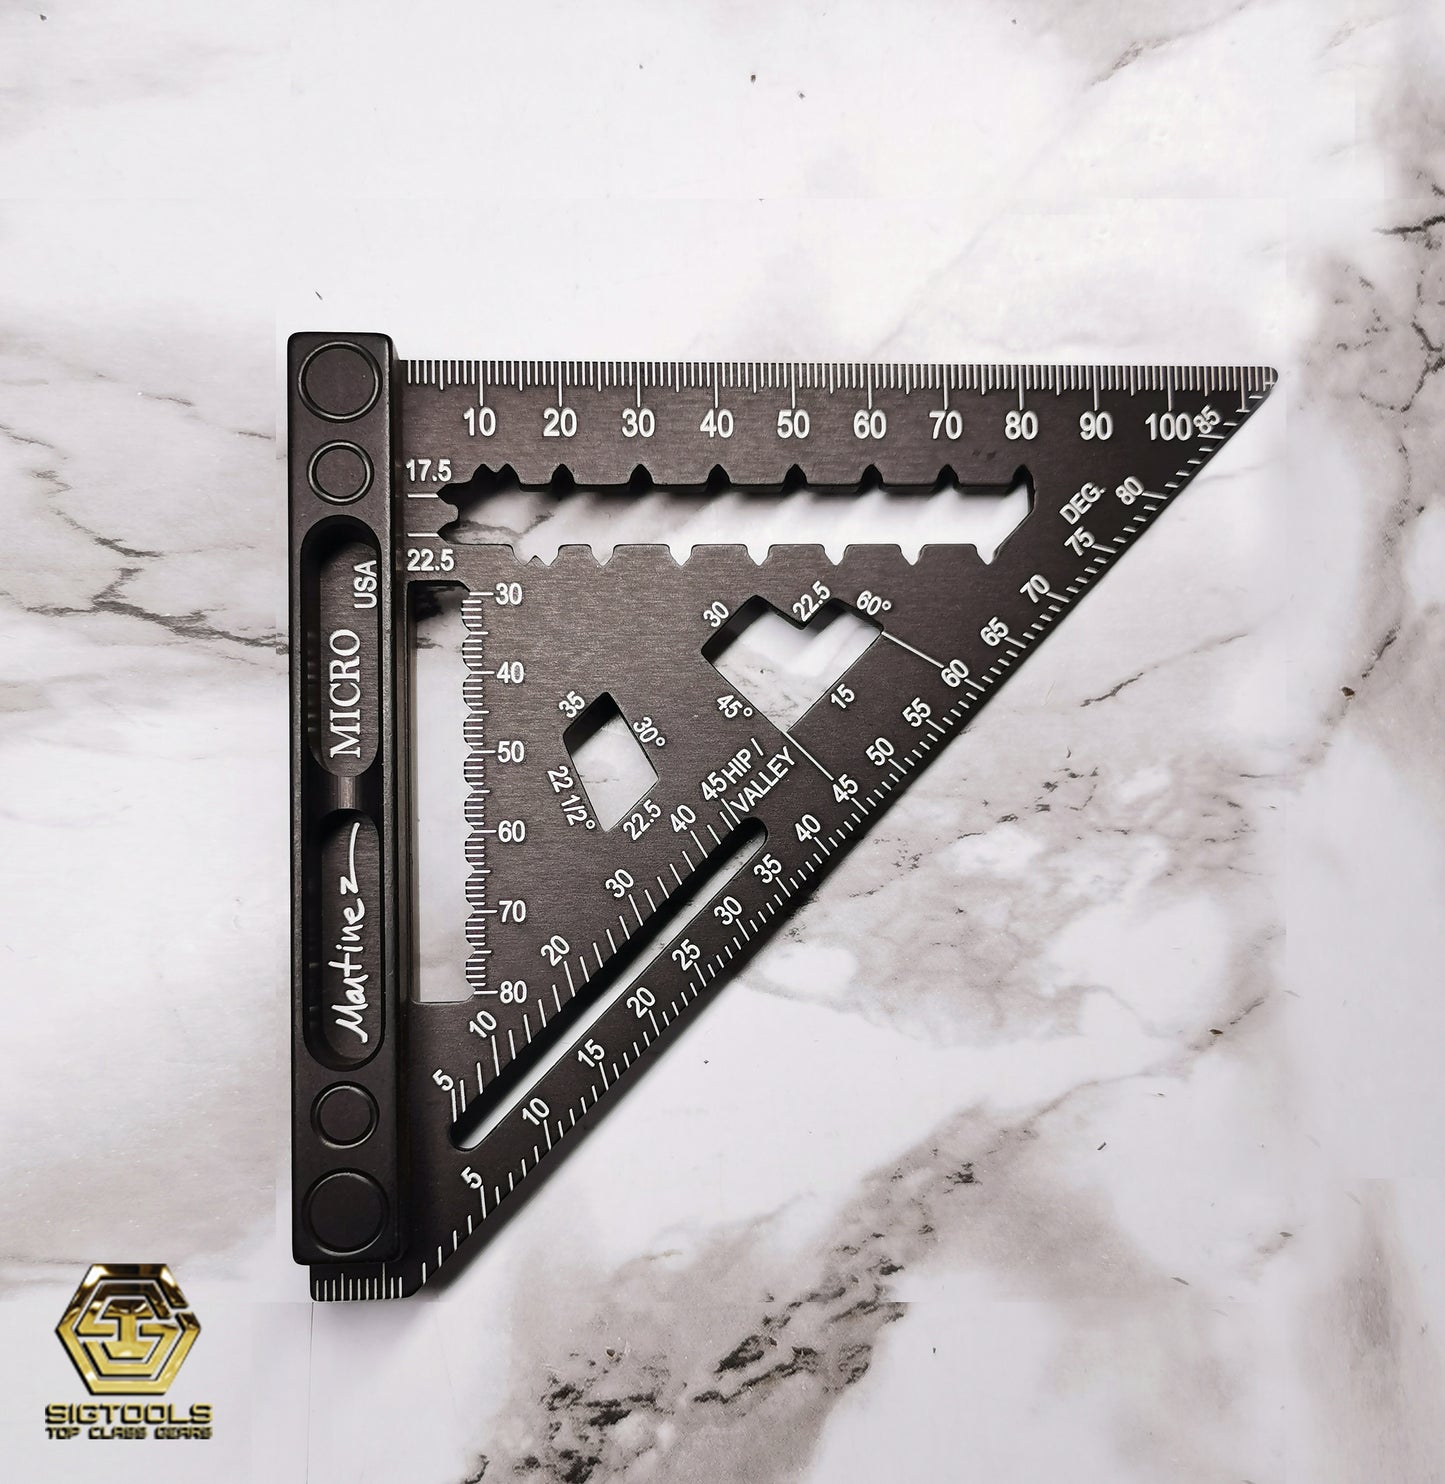 Photograph of the black Martinez Micro Square on white marble background – Metric Version, showcasing its compact design and precision engineering for metric measurements.